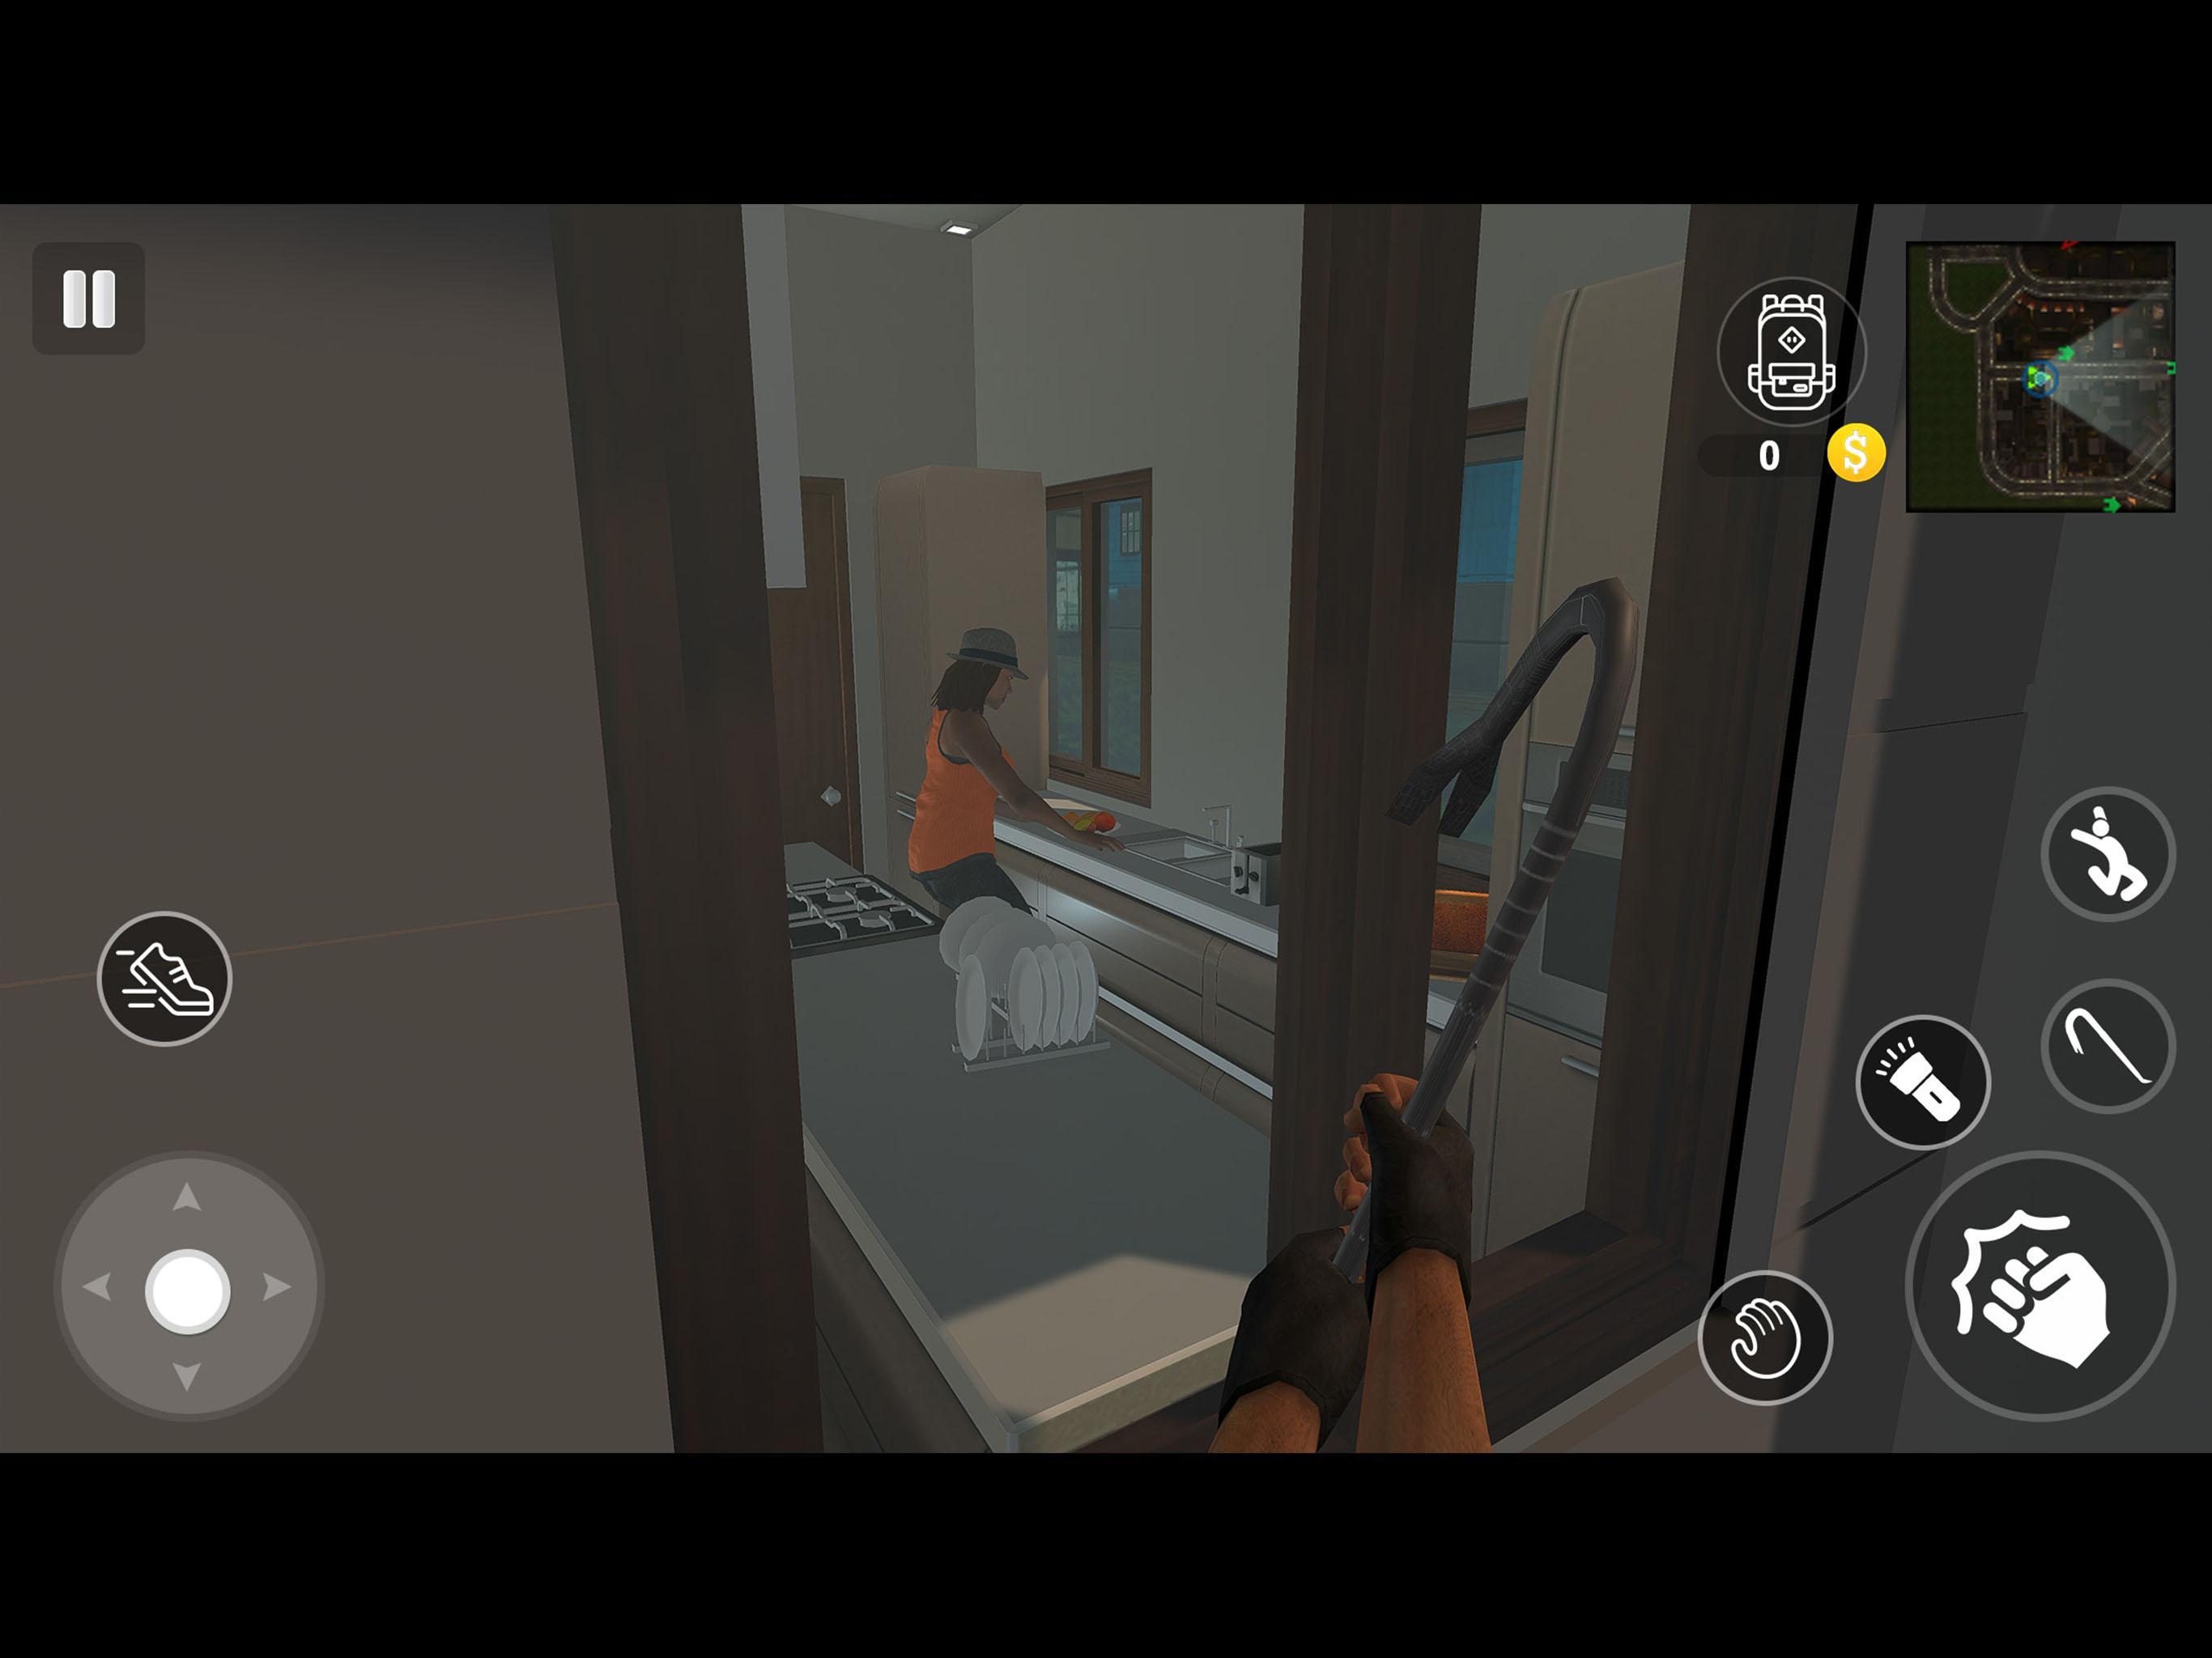 Heist Thief Robbery Sneak Simulator For Android Apk Download - roblox robbery simulator